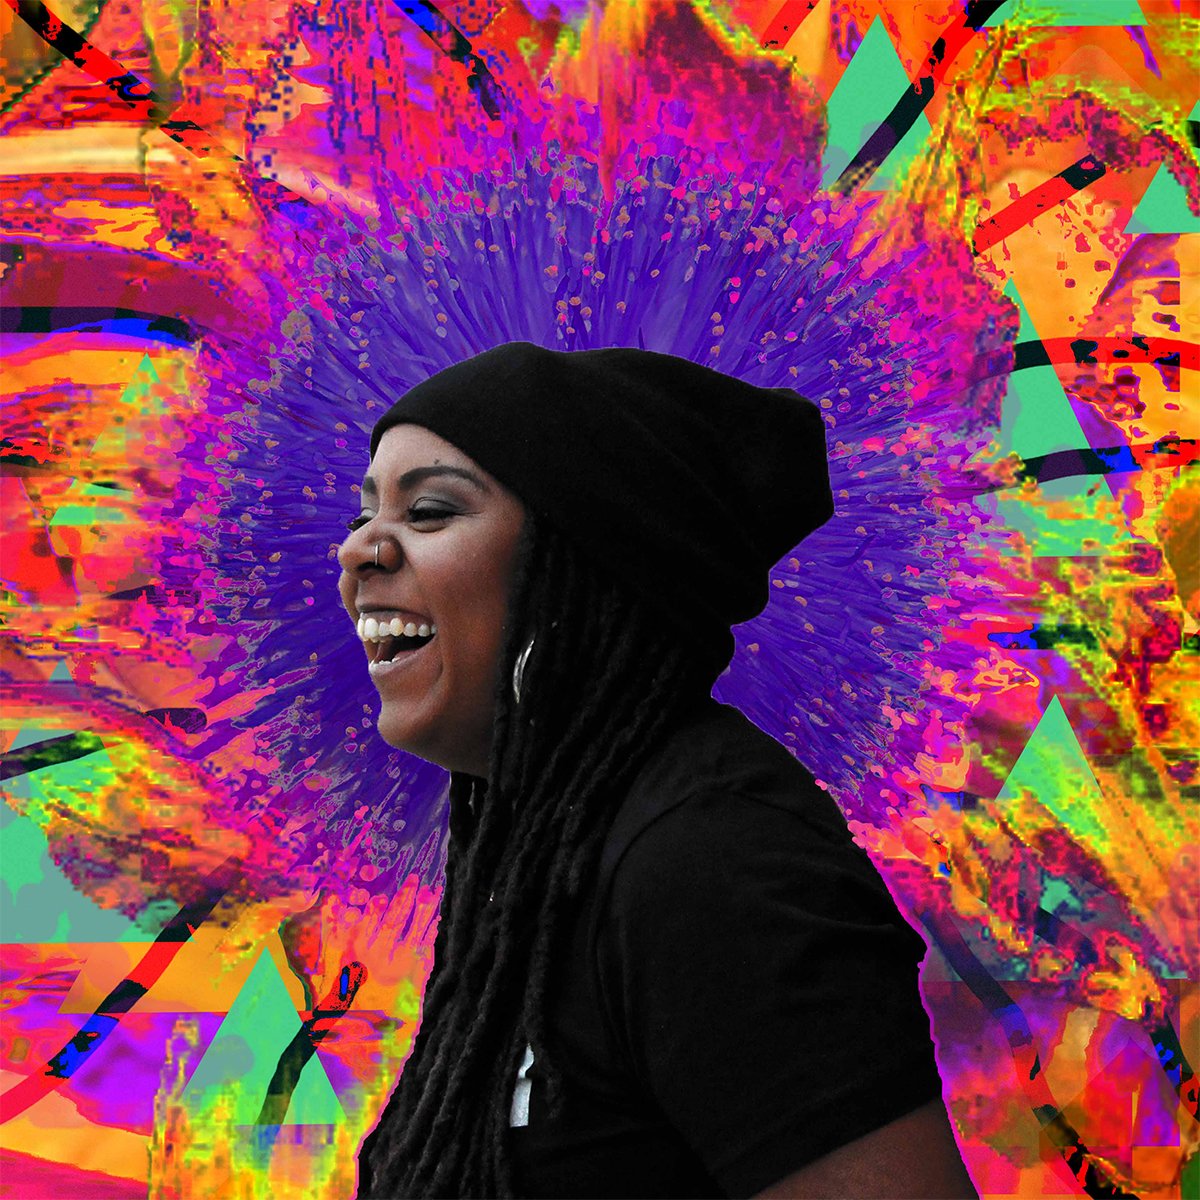 image of ruby laughing from a profile view with a colourful background and purple sun crowning her.